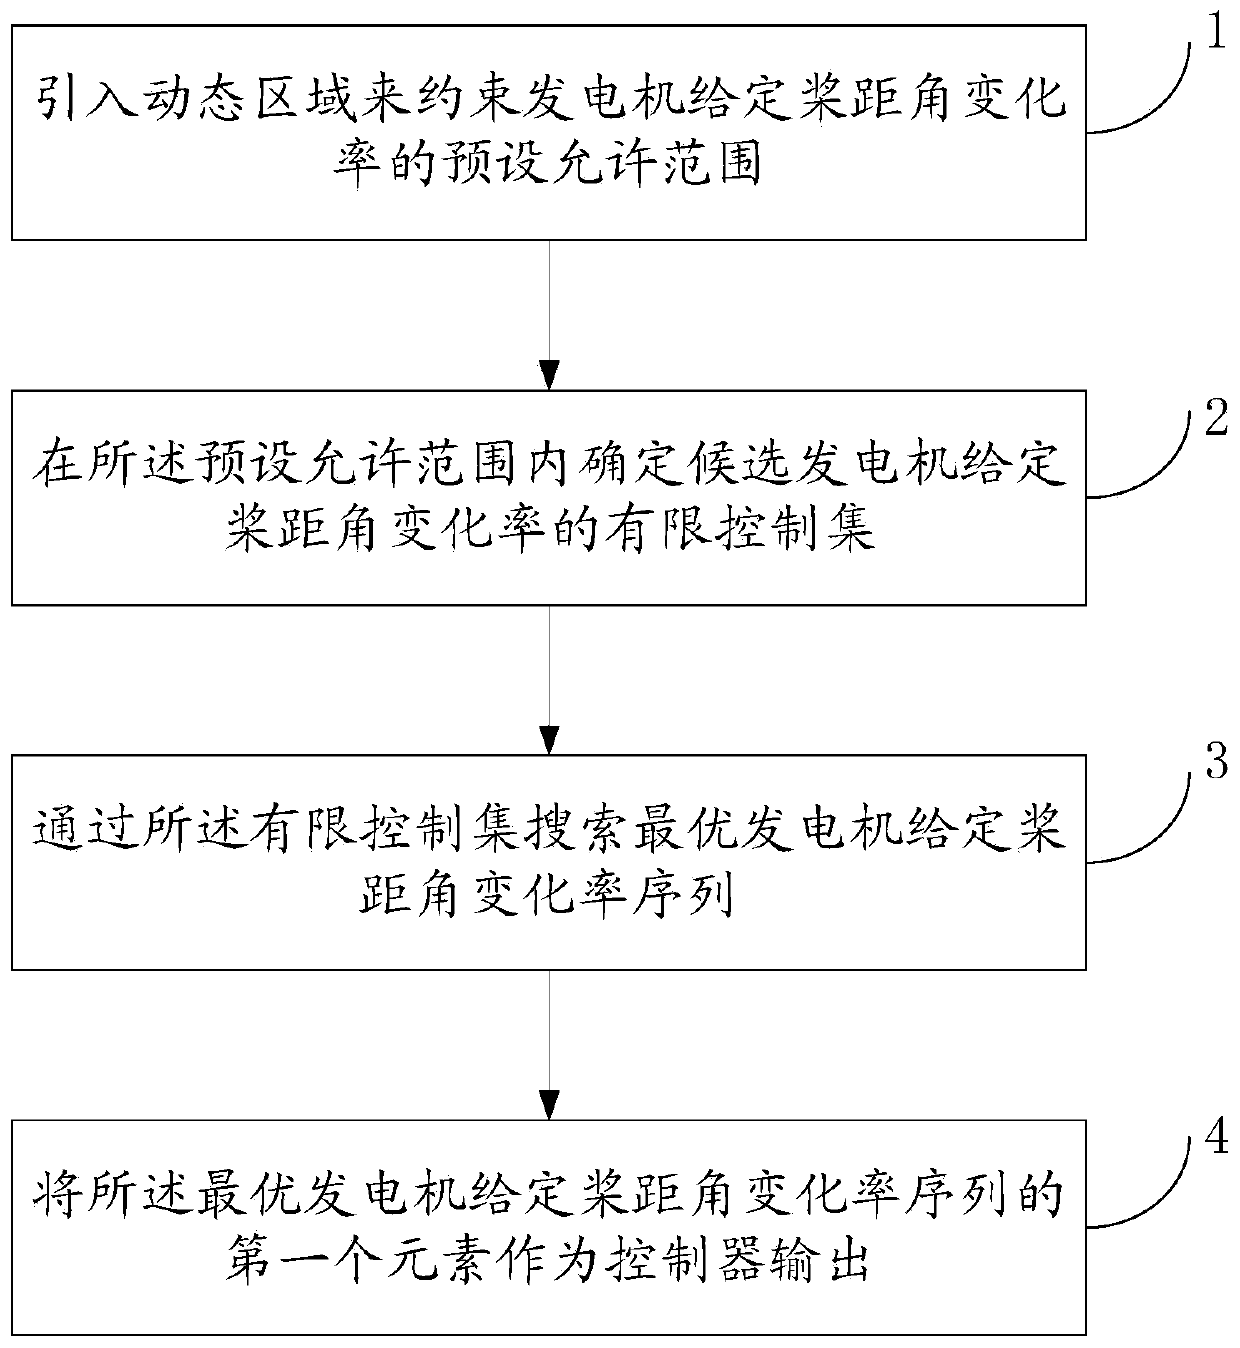 Non-linear prediction pitch control method based on wind speed in-advance measuring